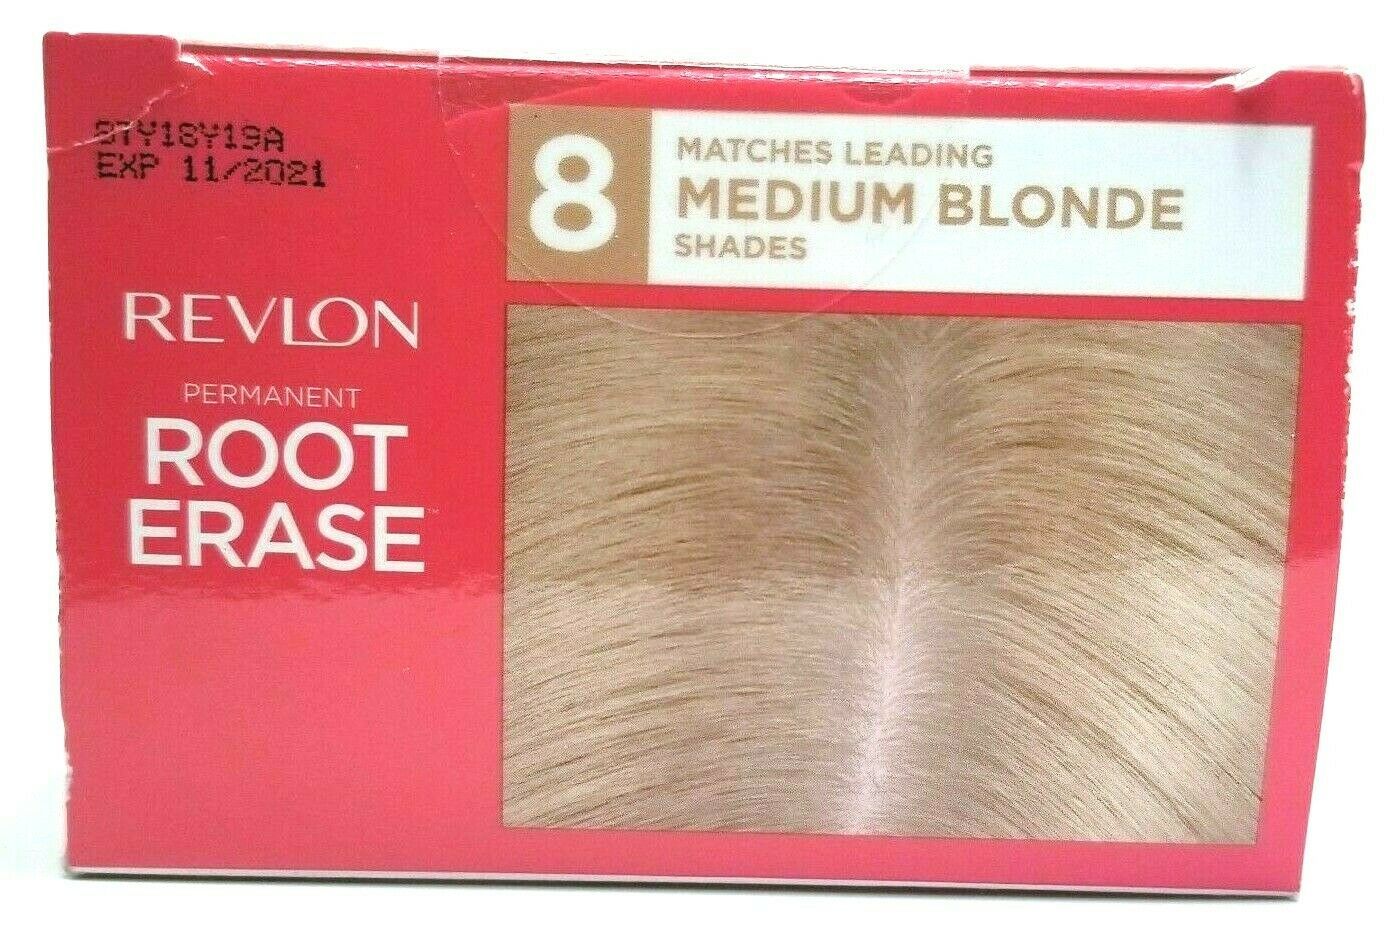 8. "Medium Blonde Haircuts for Curly Hair" - wide 4